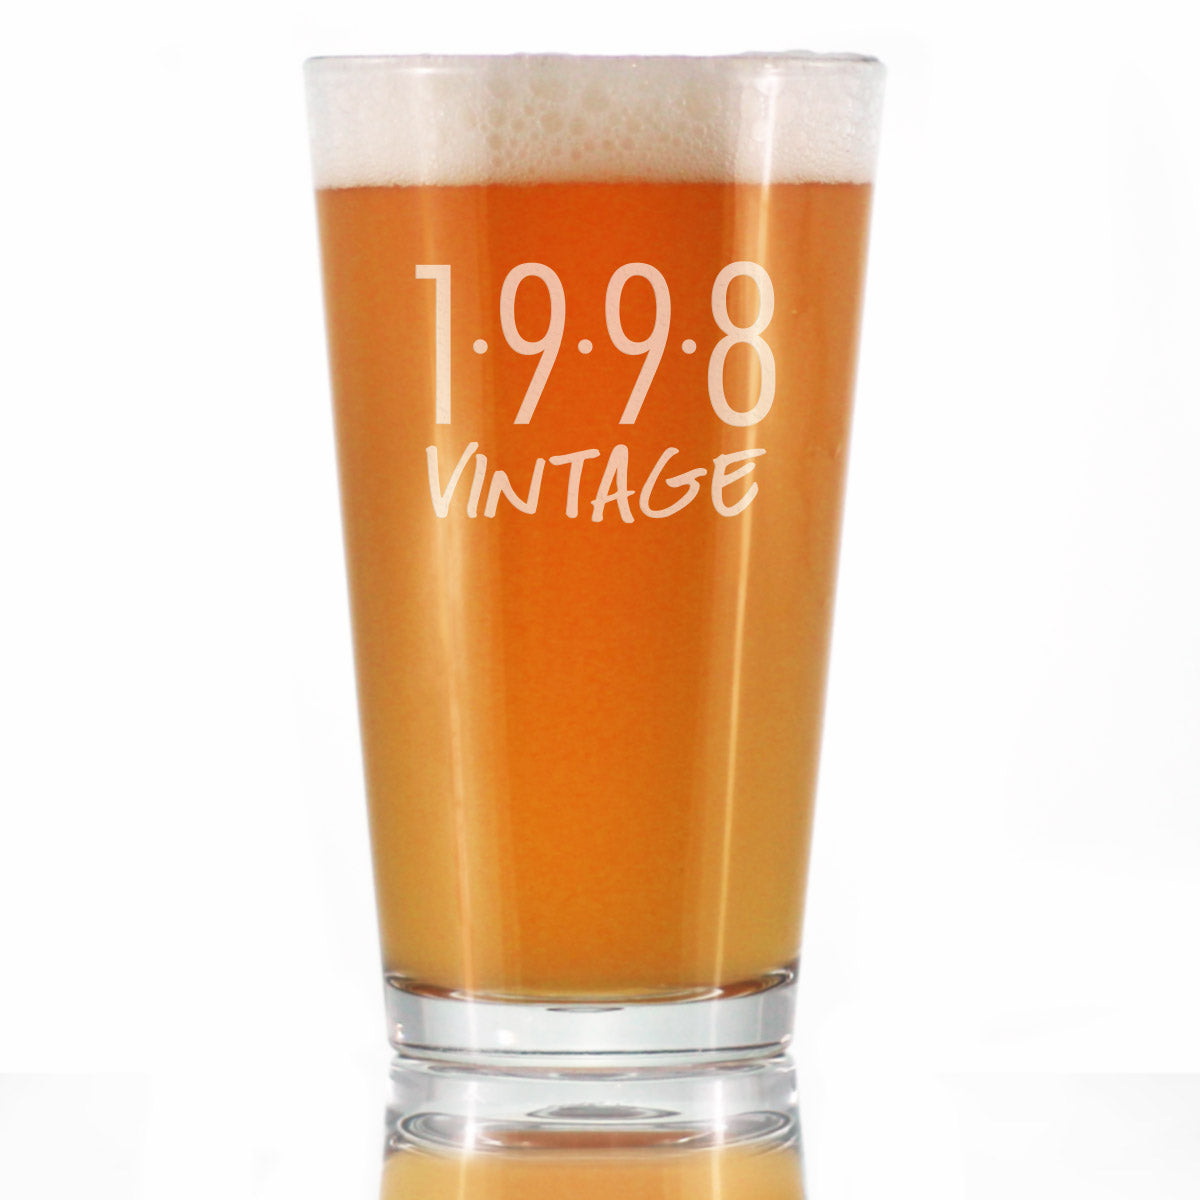 Vintage 1998 - Pint Glass for Beer - 26th Birthday Gifts for Men or Women Turning 26 - Fun Bday Party Decor - 16 oz